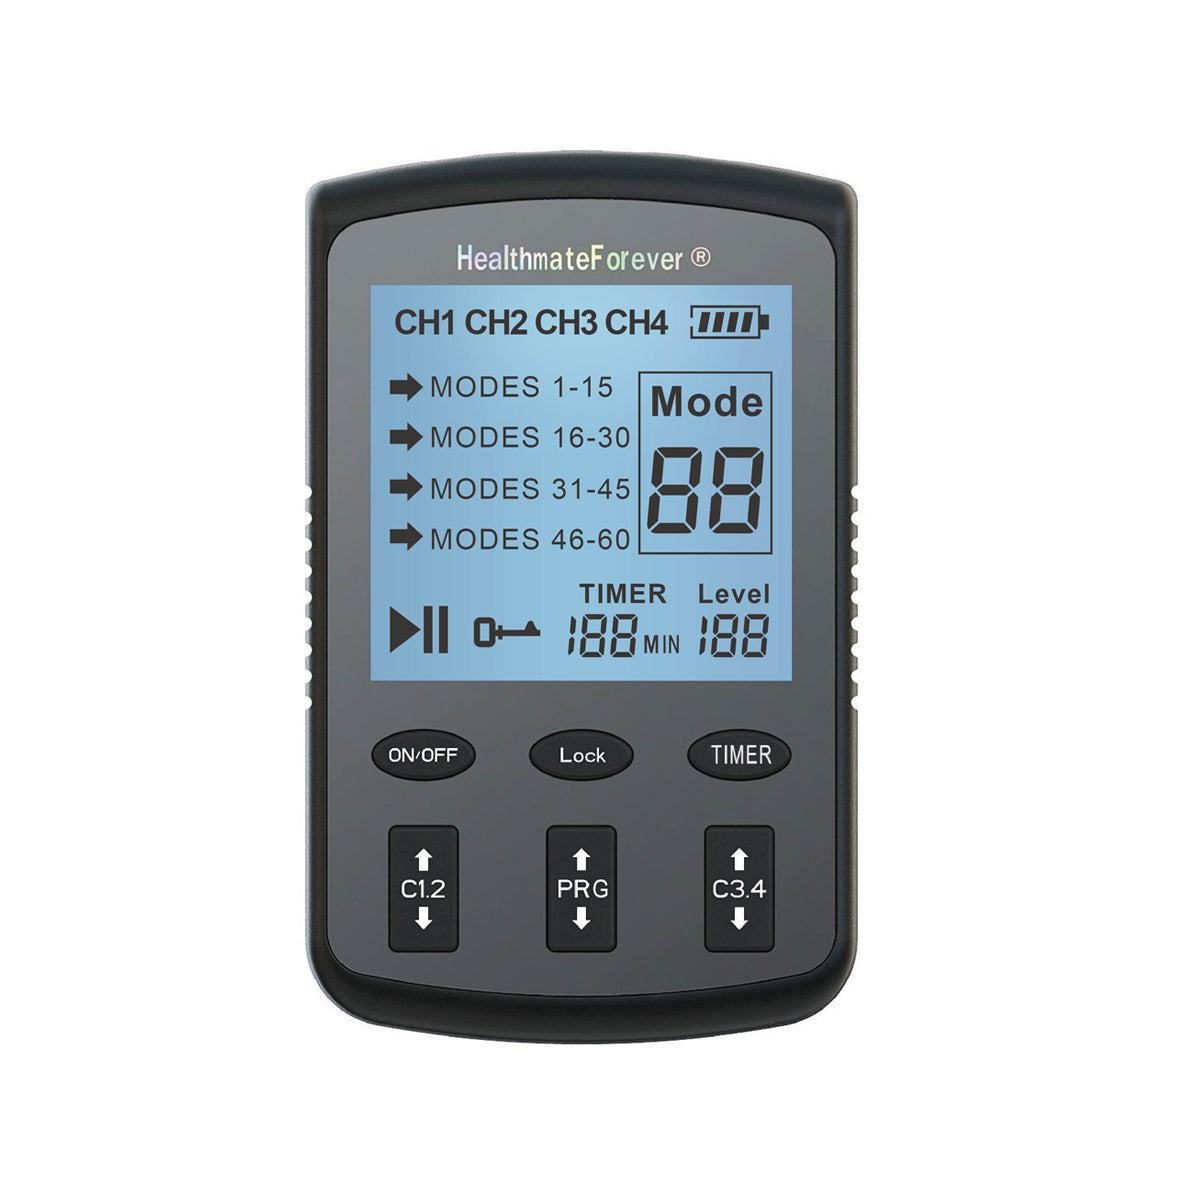 New Arrival - 2020 Version ZT60AB Powerful Electrotherapy Pain Relief TENS UNIT - 2 Year Warranty - HealthmateForever.com